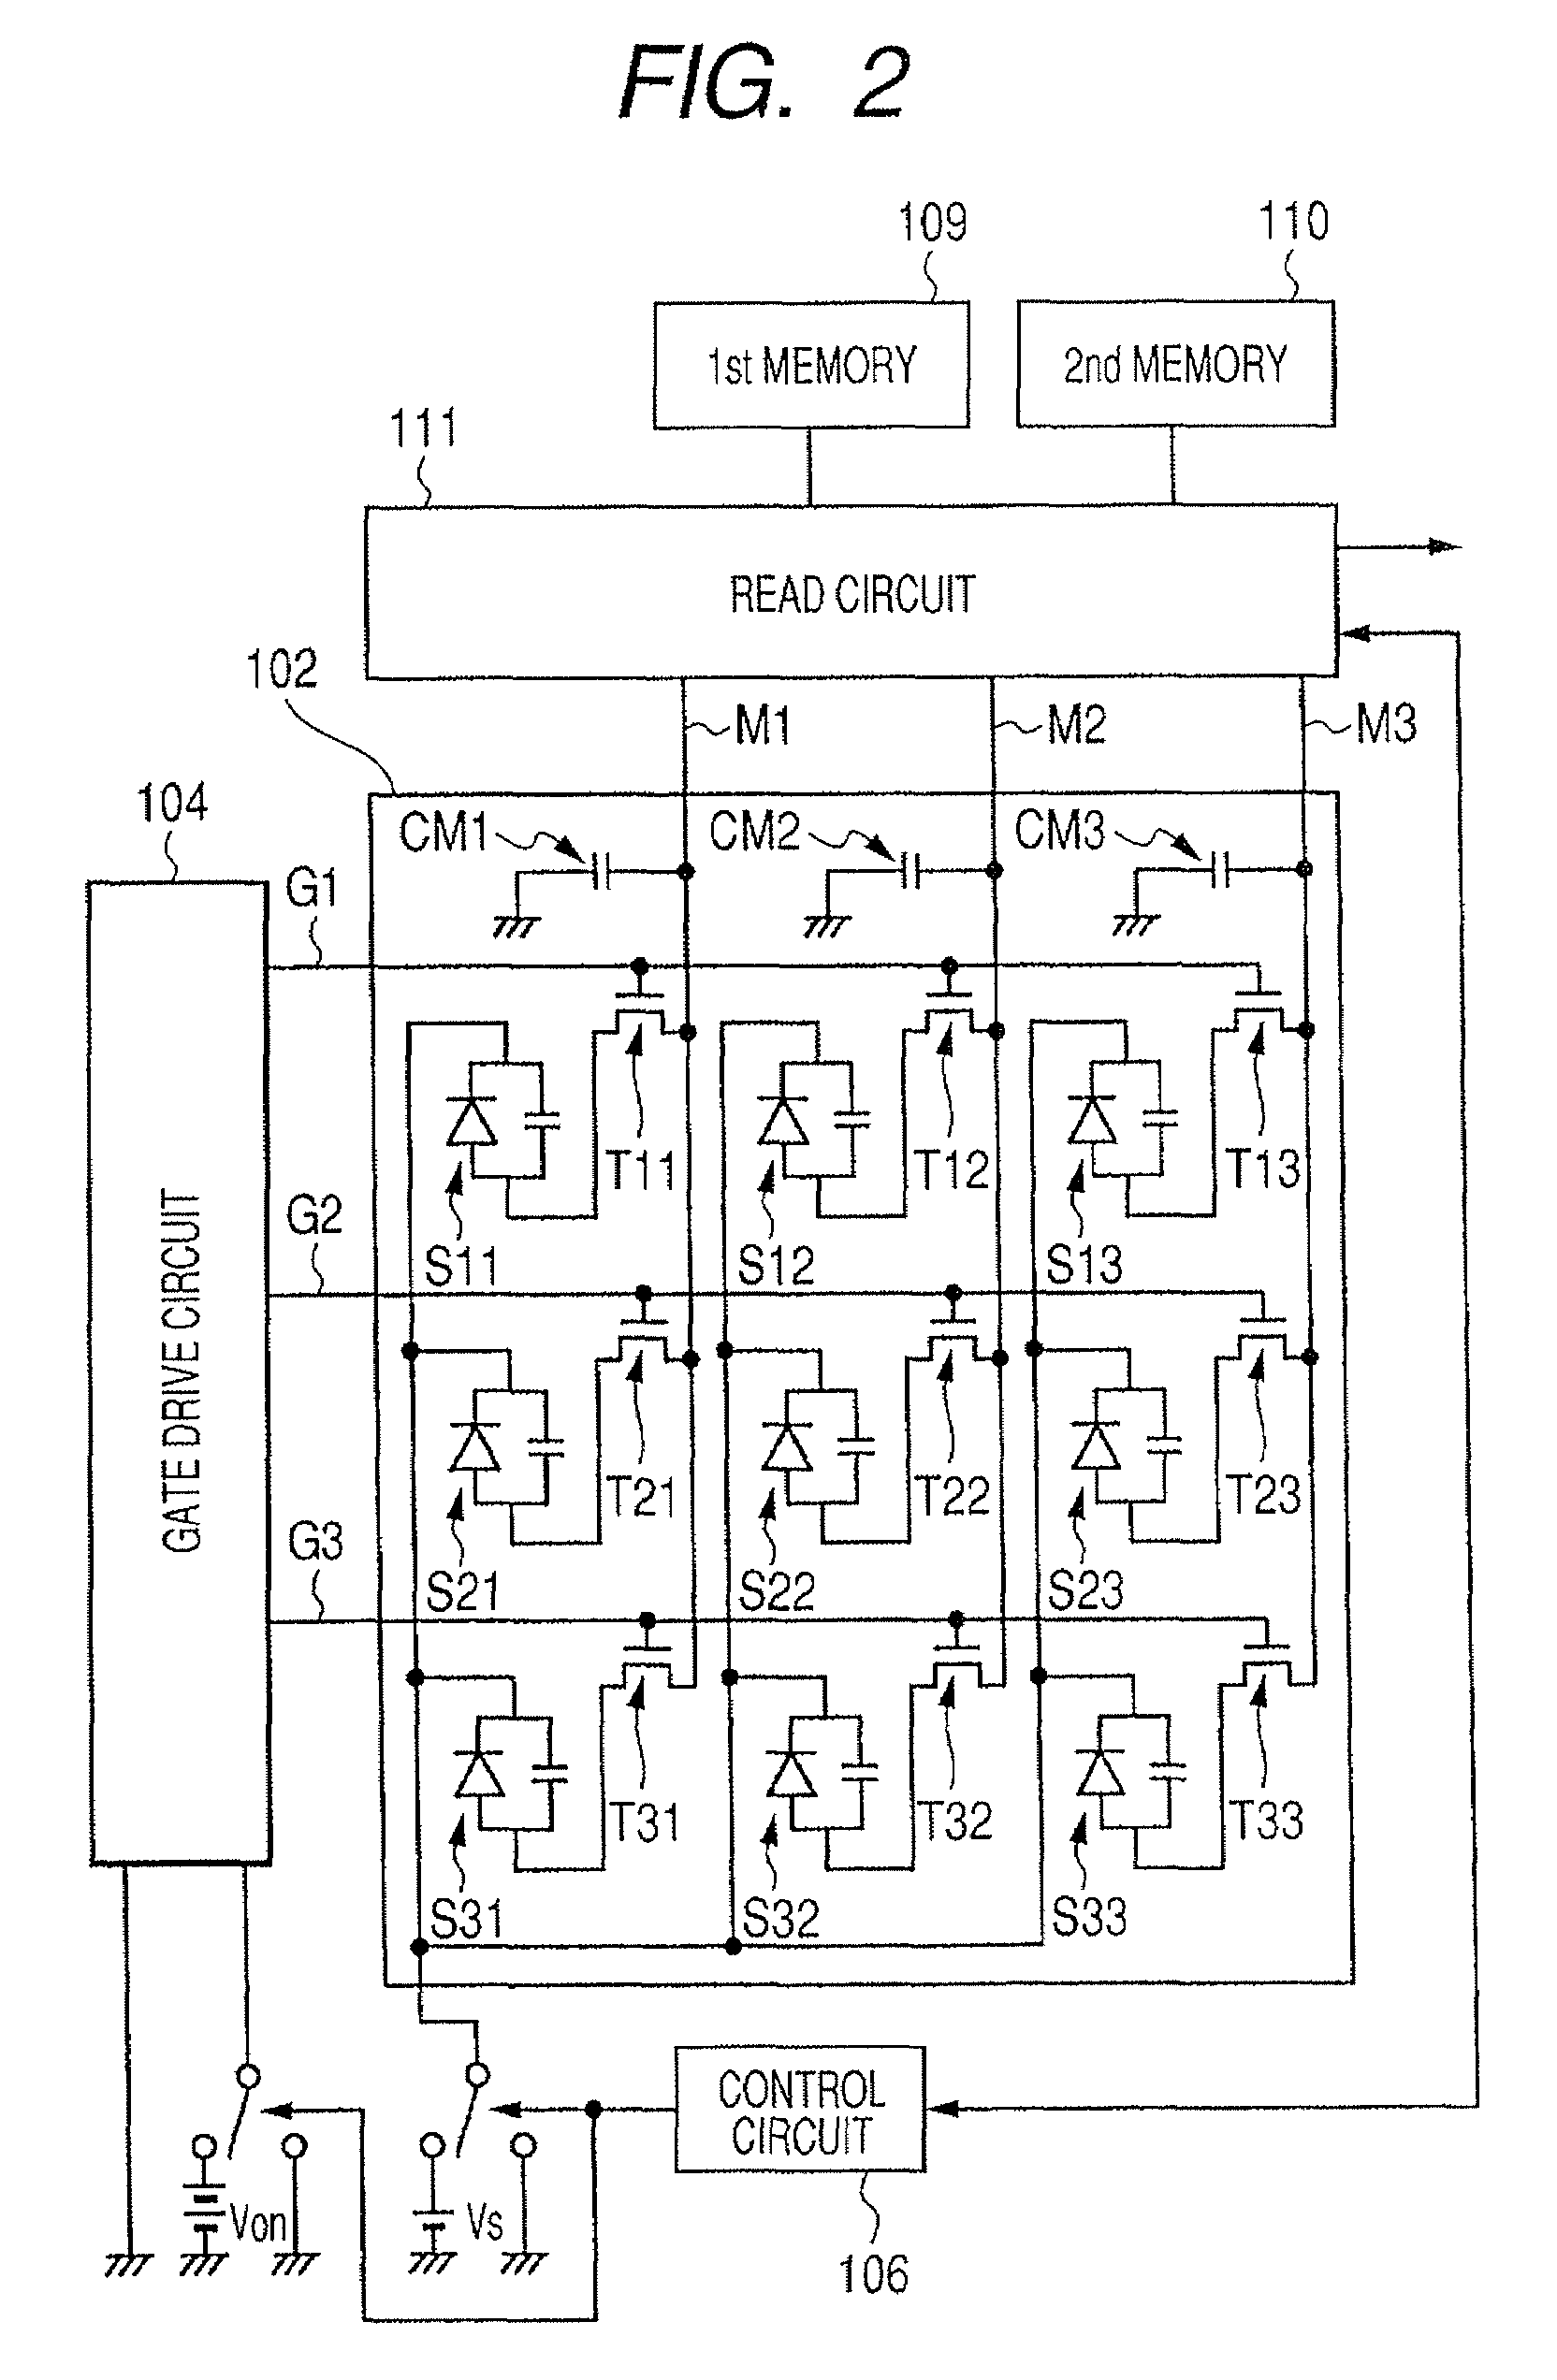 Radiation imaging apparatus and radiation imaging system